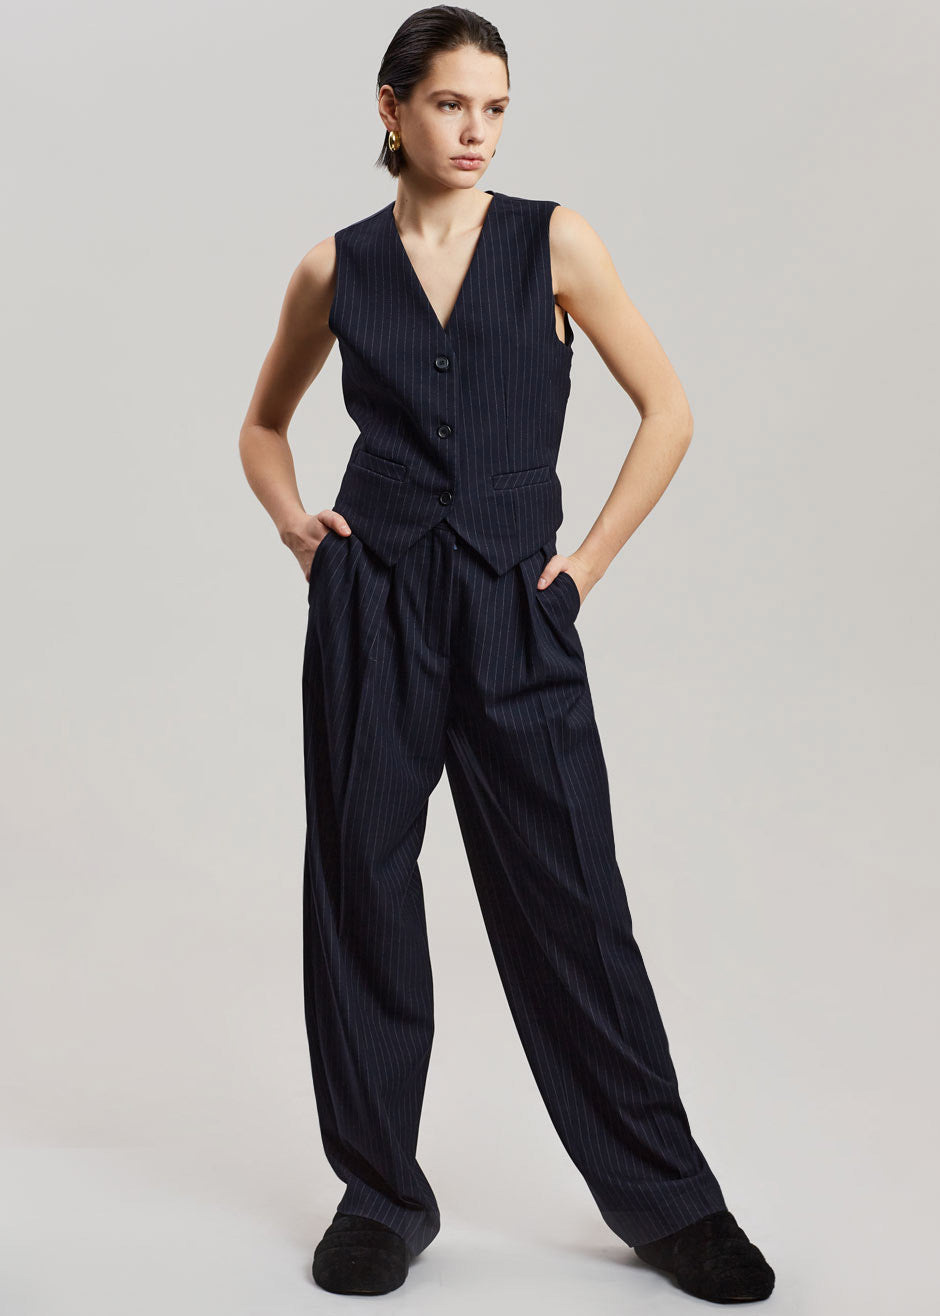 Tansy Tailored Vest - Navy Pinstripe - 3